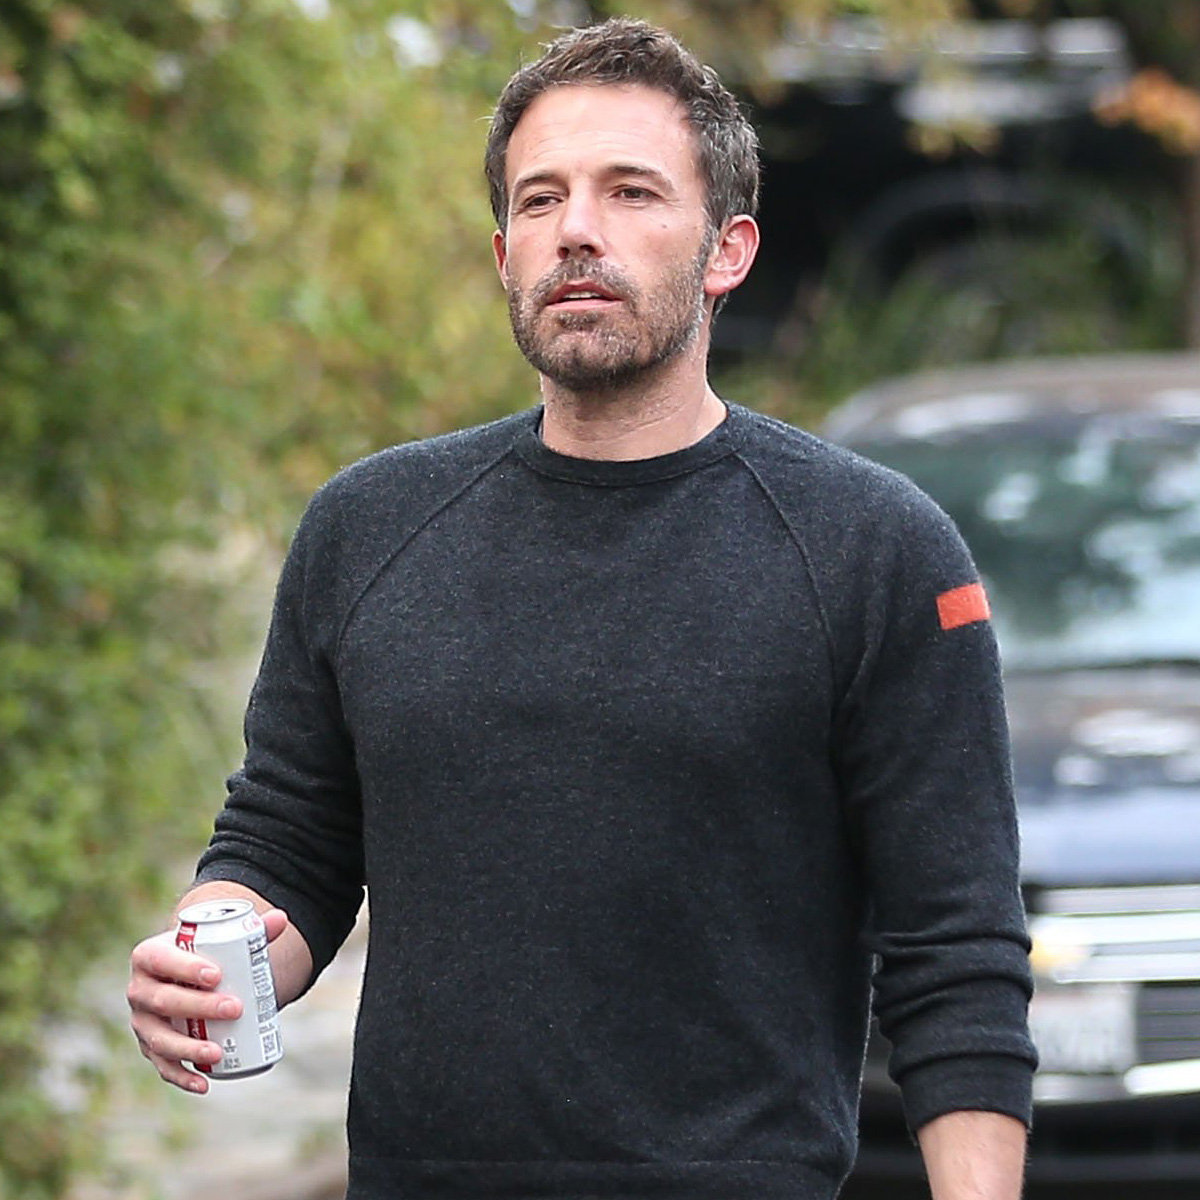 Ben Affleck Trying to Juggle His Dunkin' Donuts Order Is 2020 in a Nutshell - E! Online